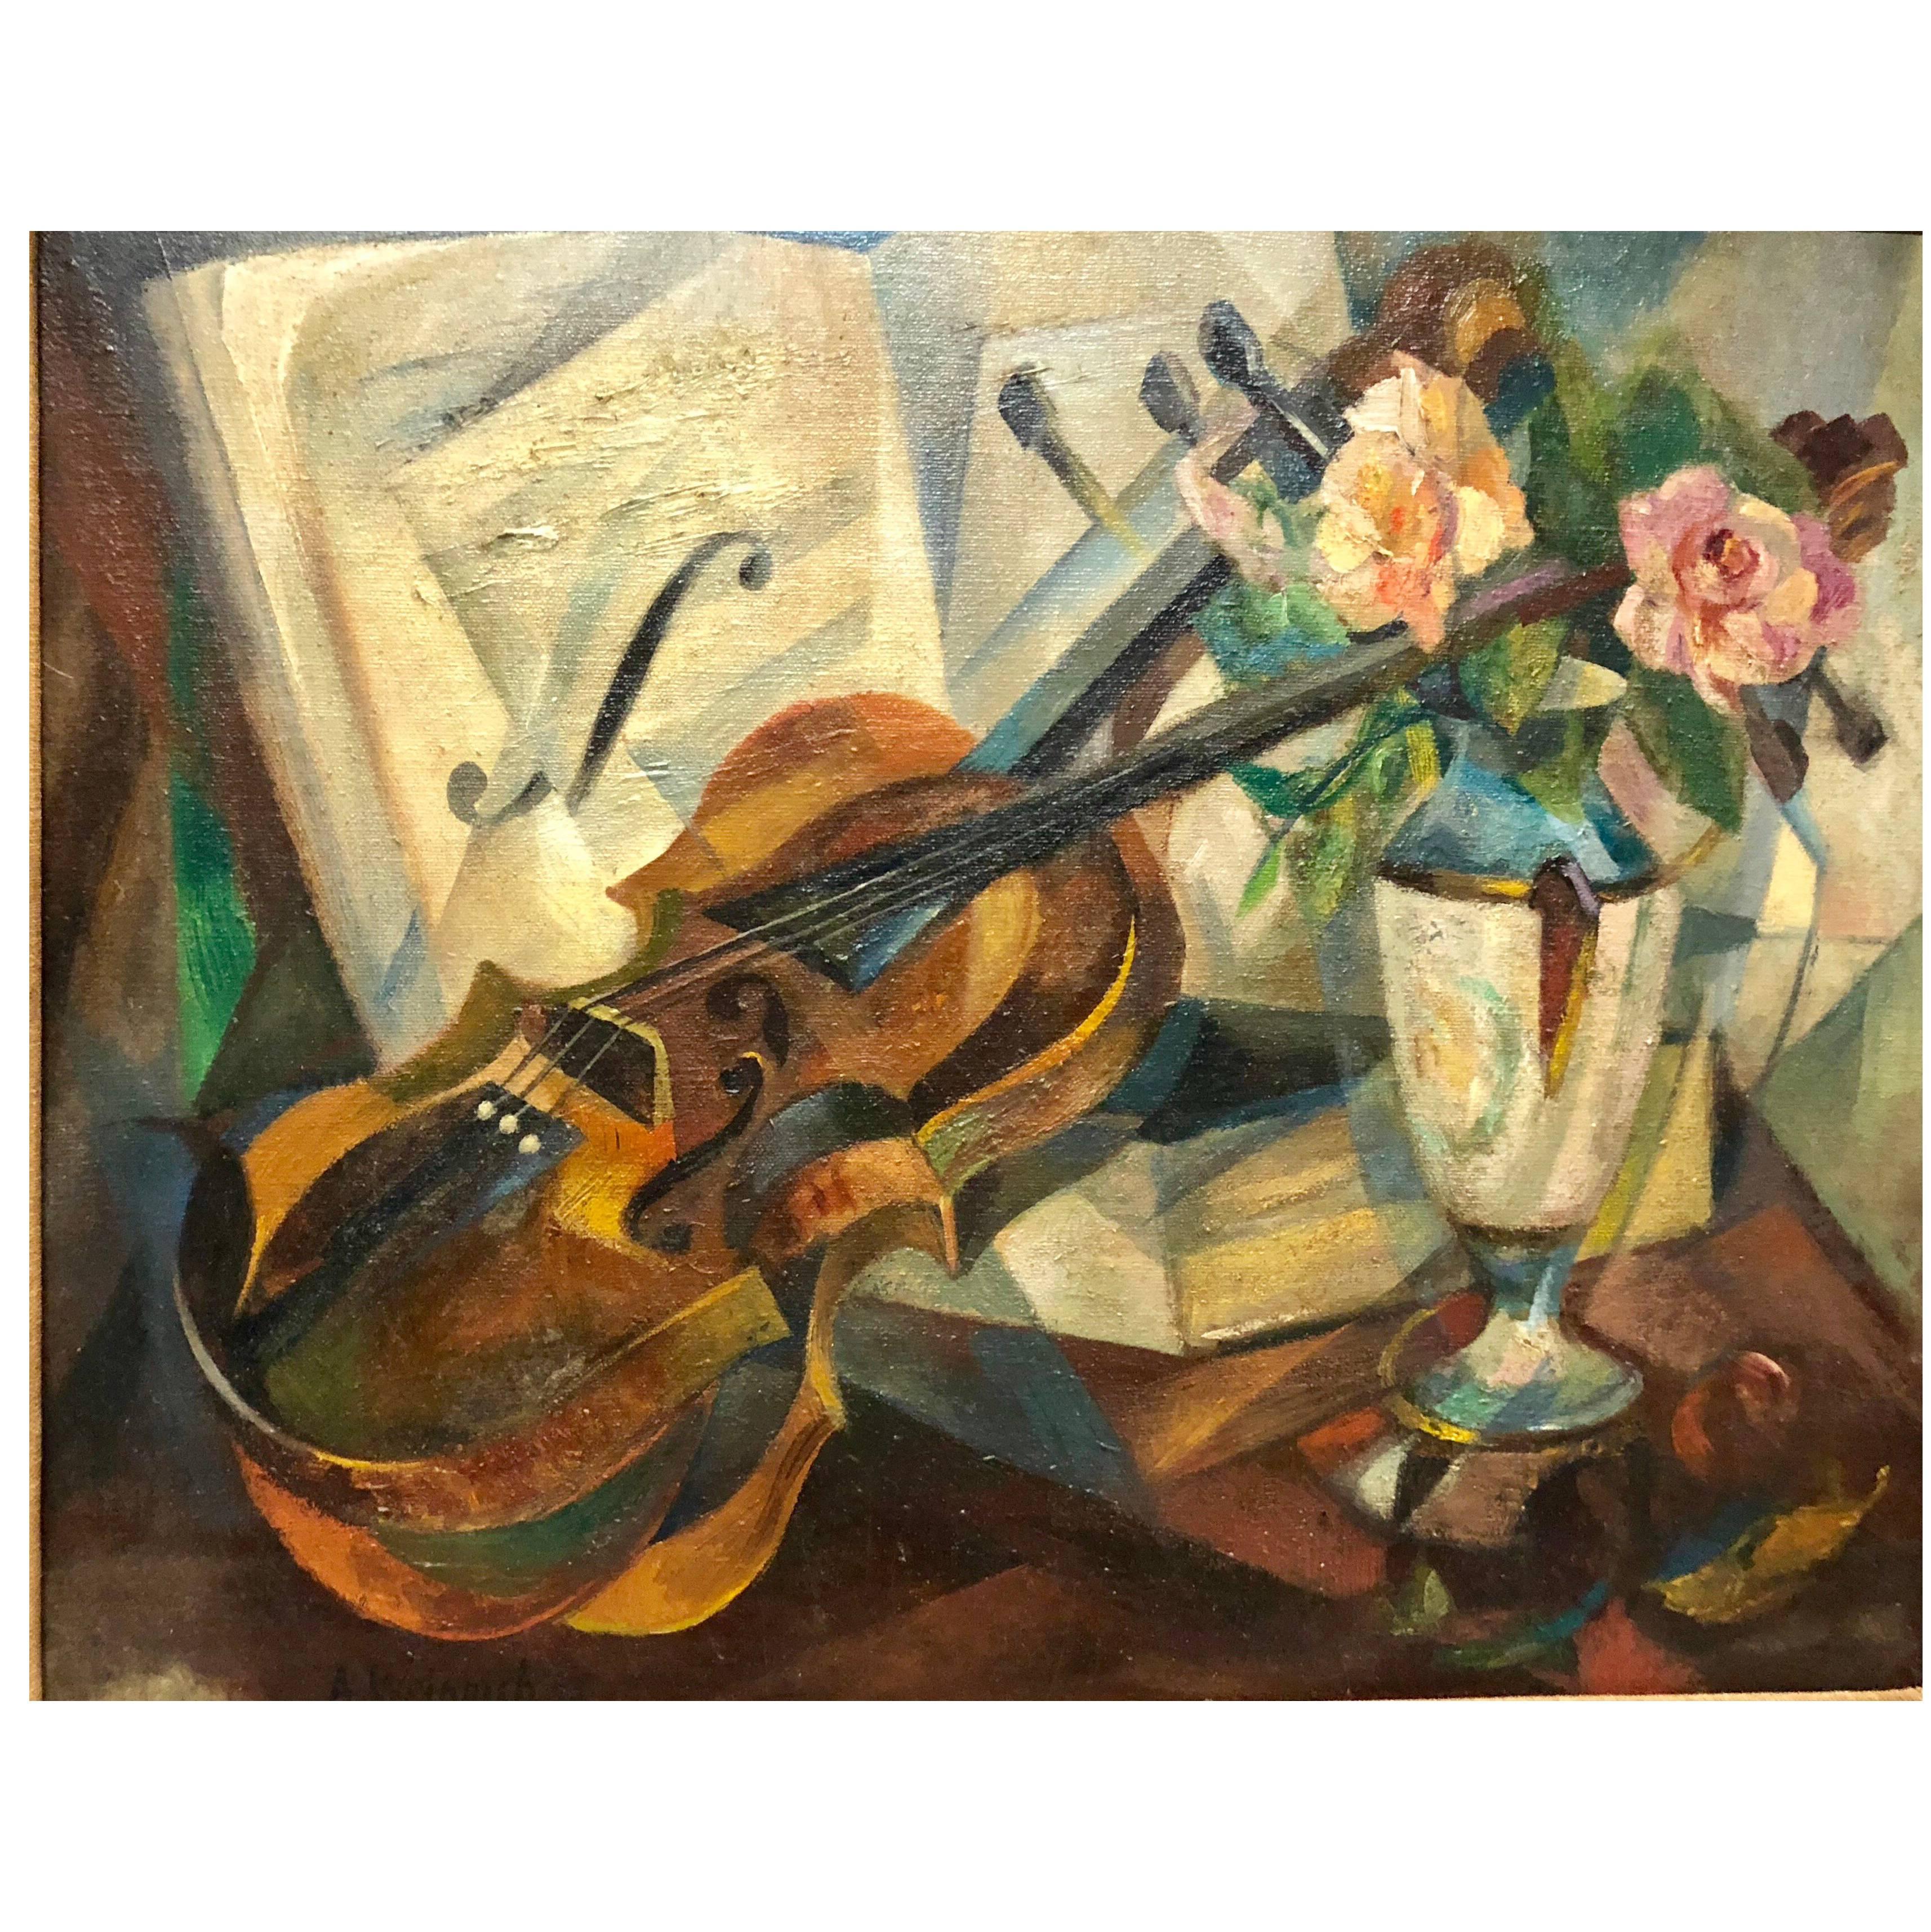 Still life painting (Violin, Flowers), Oil on canvas, by Agnes Weinrich, Signed and dated 